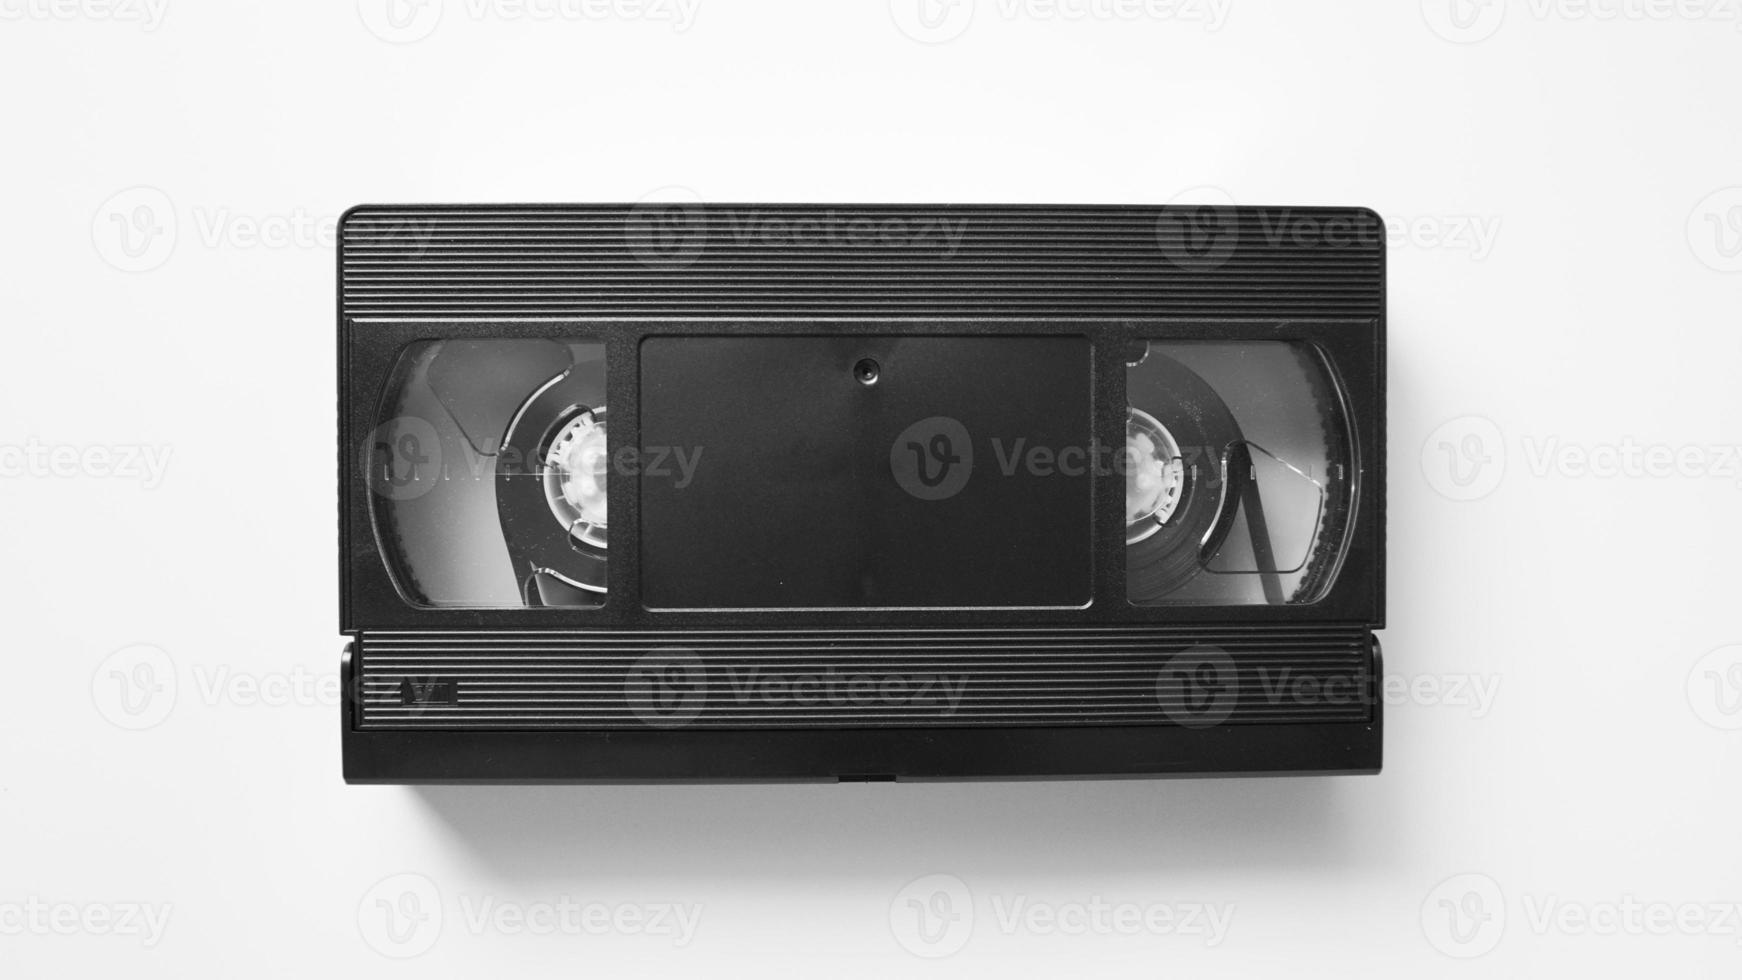 VHS tape front side. Video Home System tape cassette on white background. photo